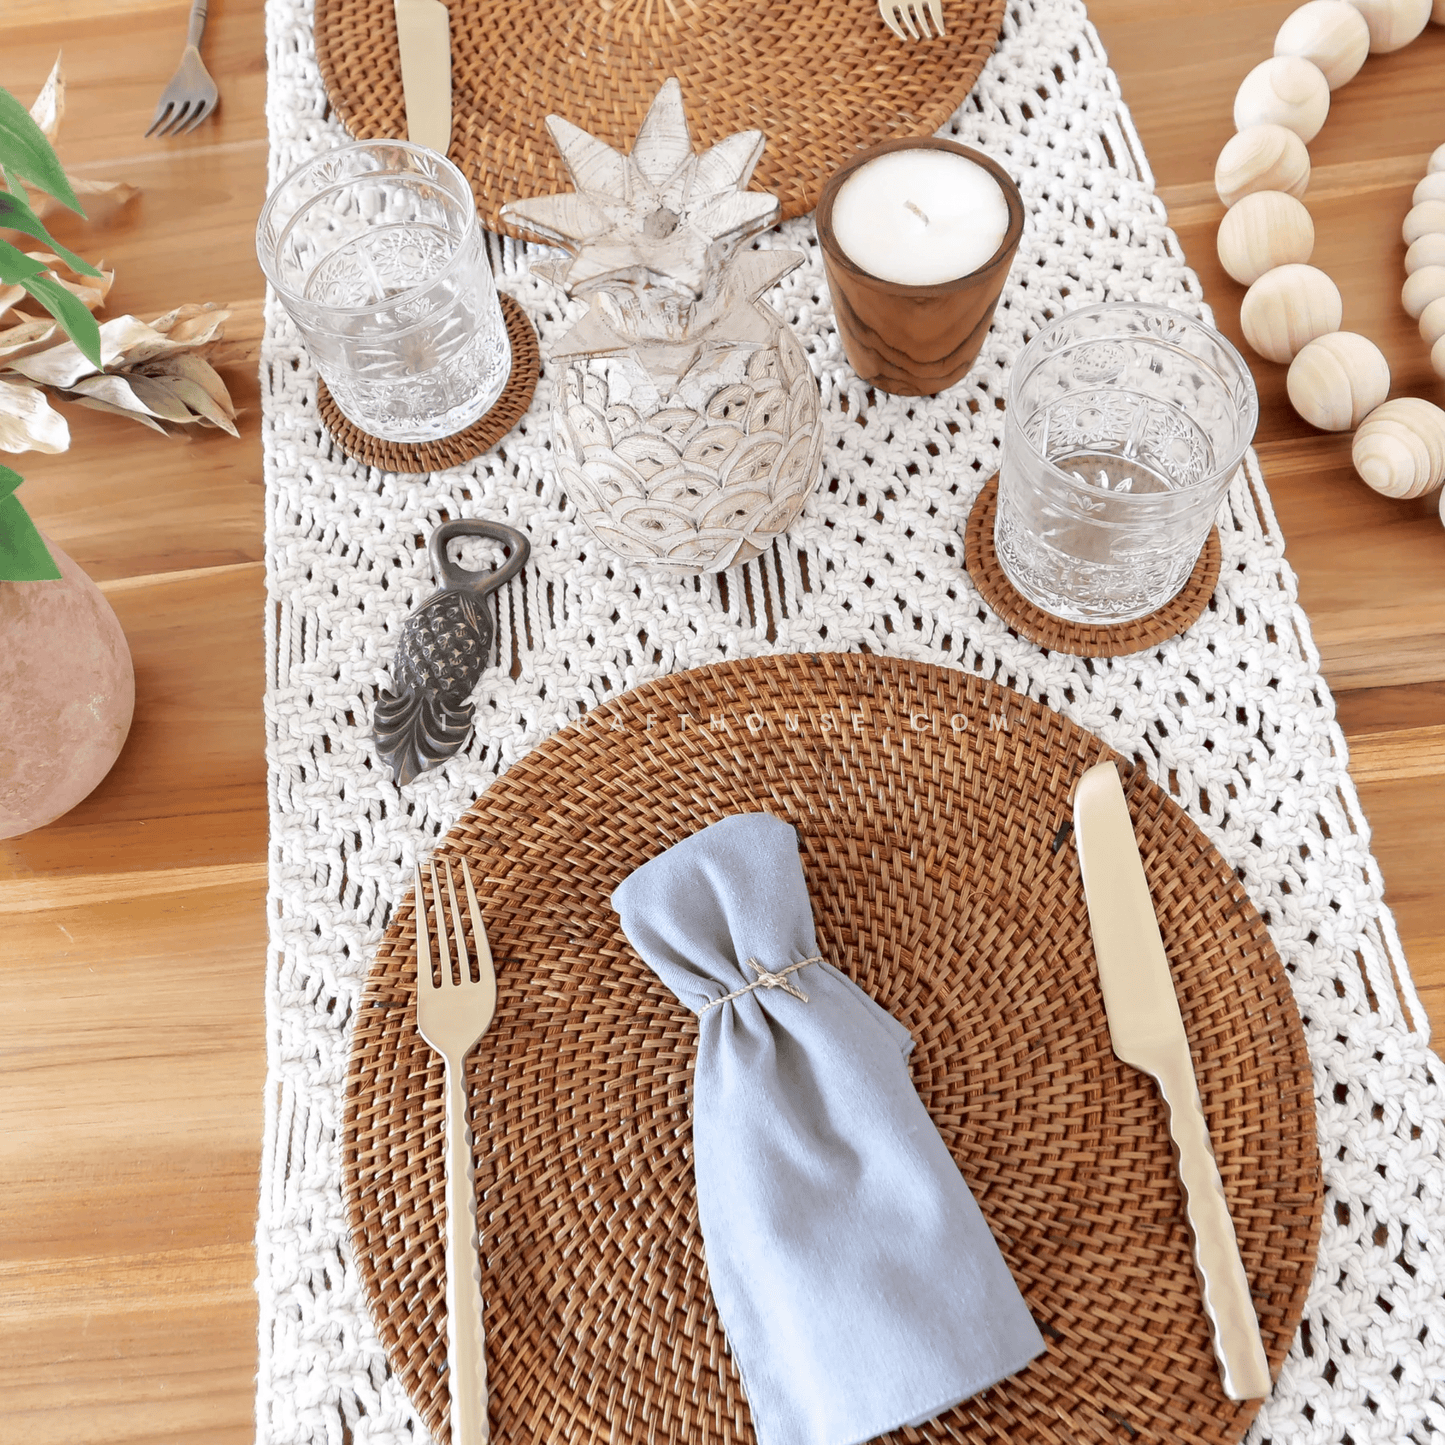 Hand-woven Round Rattan Placemats Set For Farmhouse Dining Table Decor